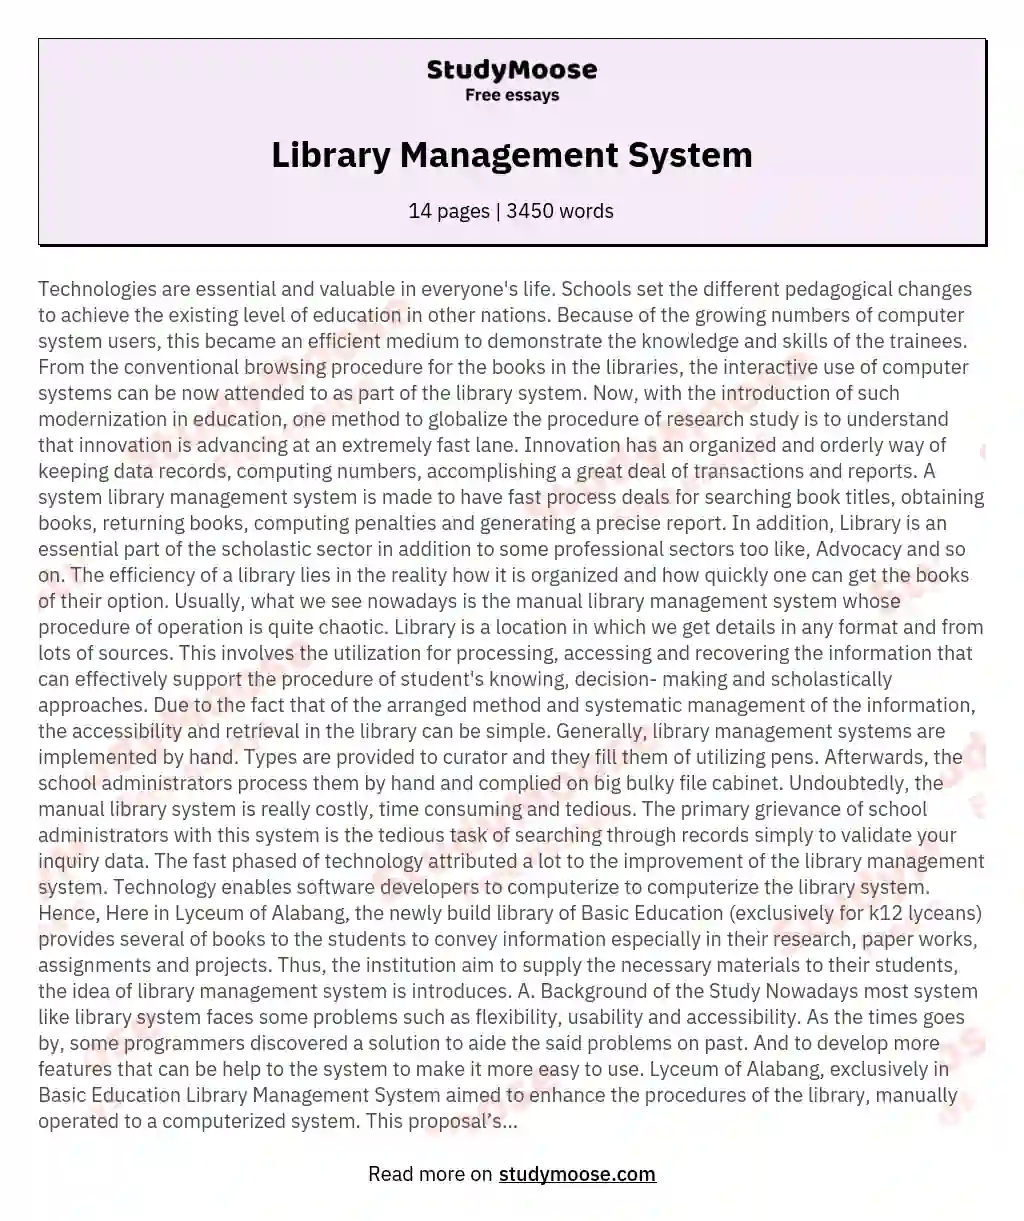 Library Management System essay